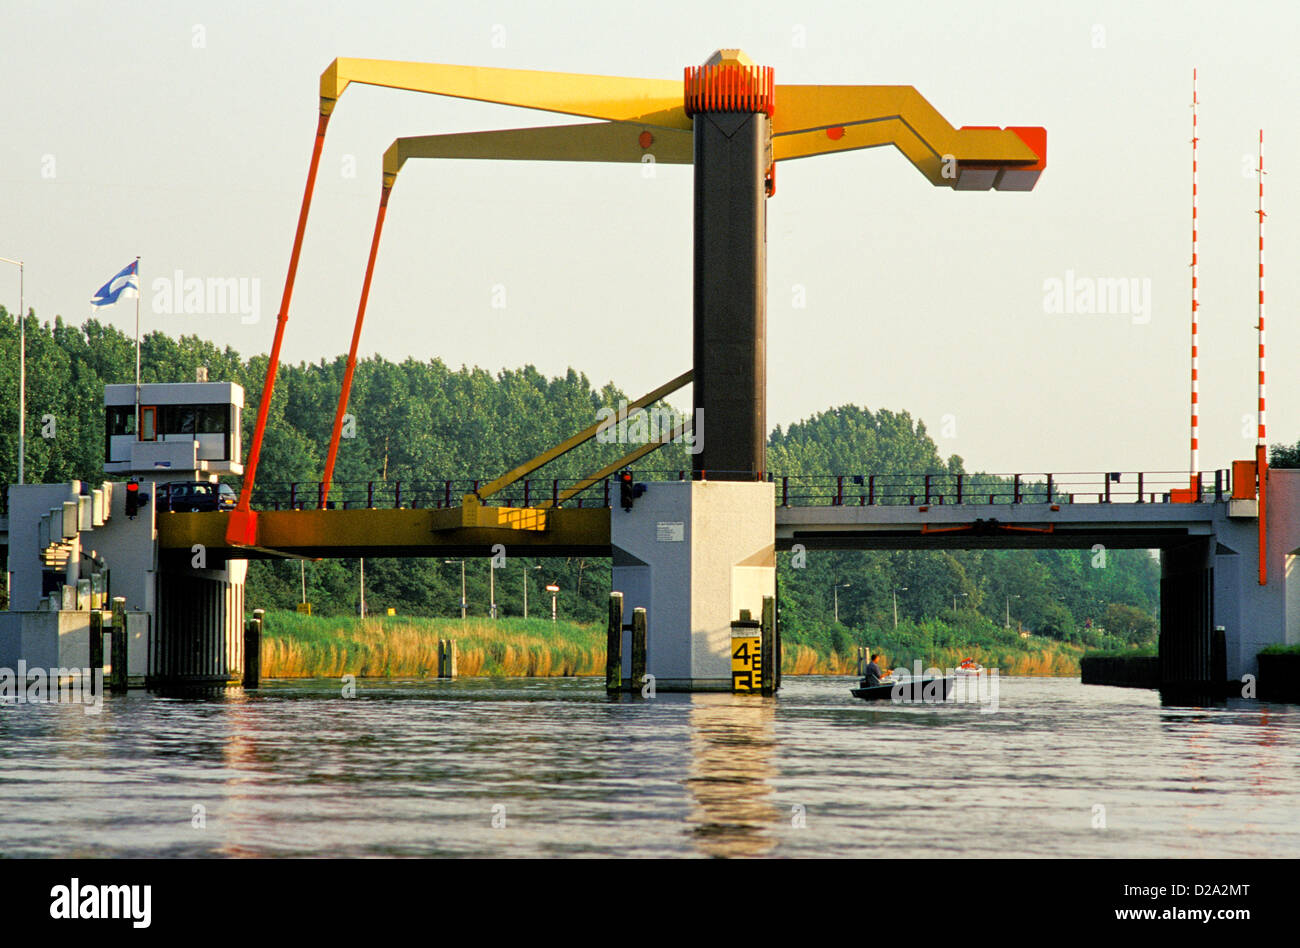 Netherlands. Near Amsterdam. Bridge With Small Boat Crossing Under. Canal. Stock Photo